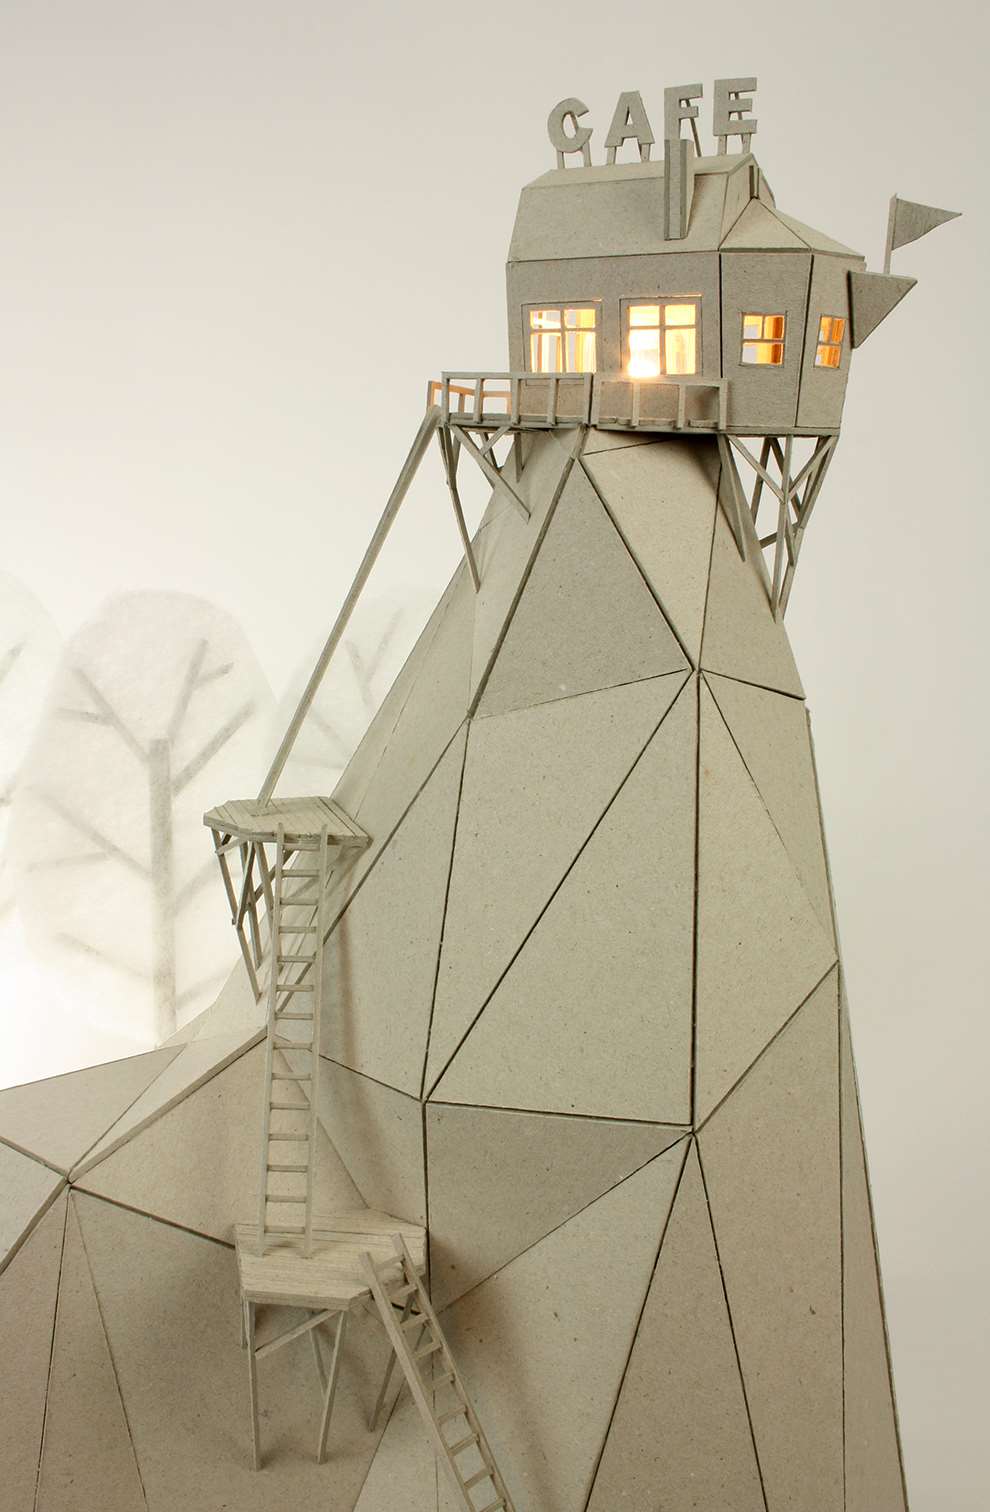 Vera Van Wolferen, Crafted intricate paper and balsa wood sculpture of a  cafe at the top of a Rocky Mountain, with trees in the background. Crafted Magical miniature universe.